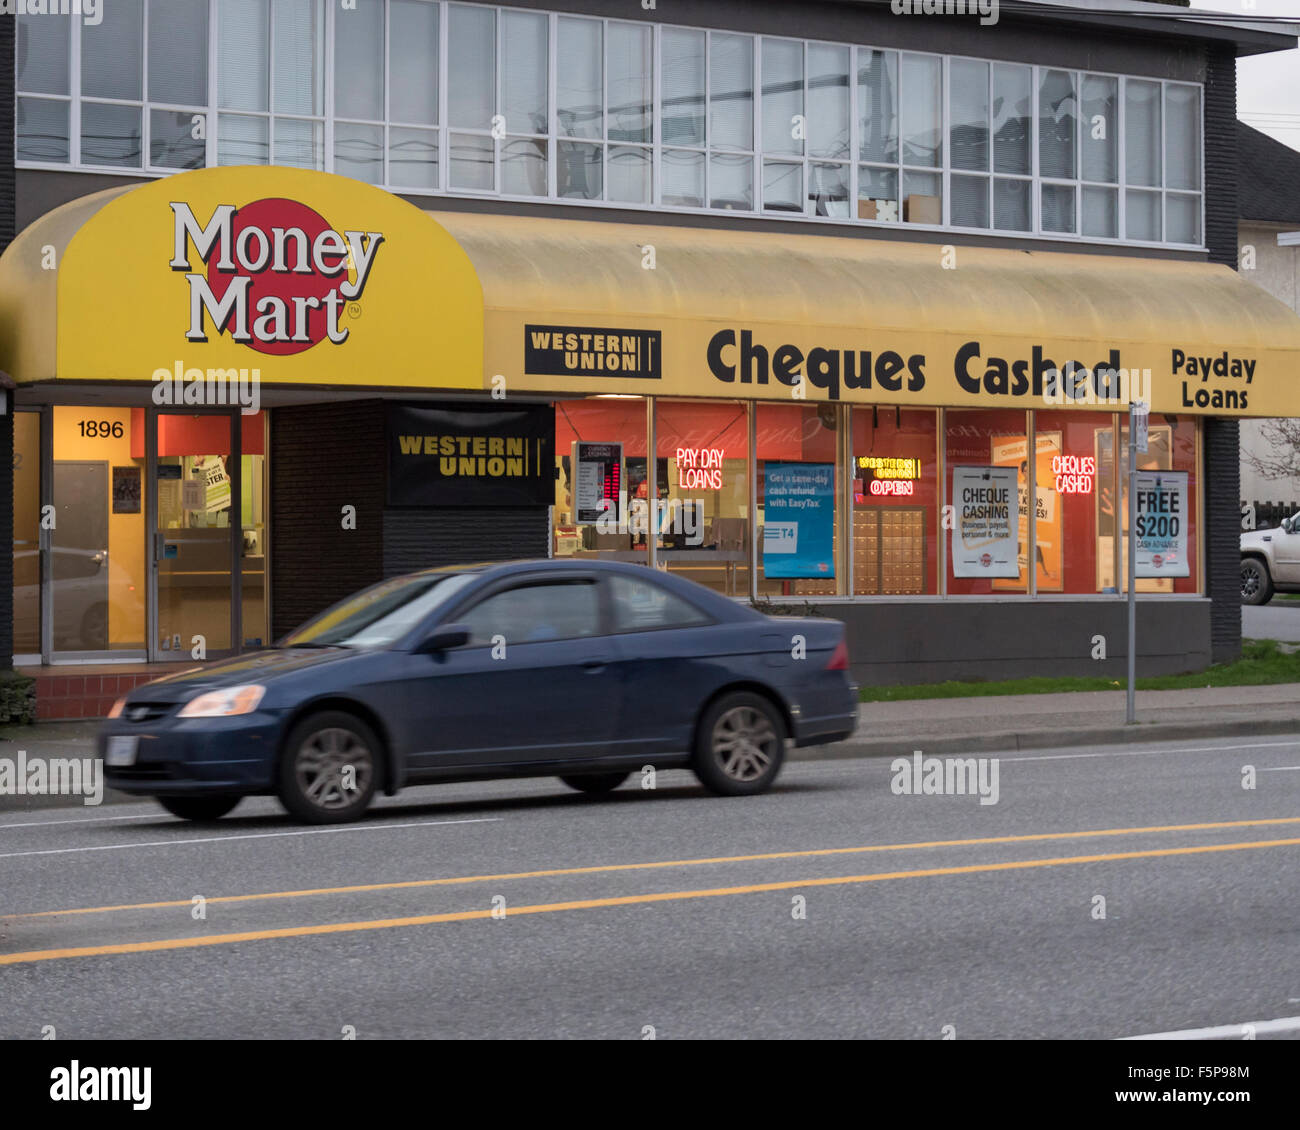 Money Mart cheque cashing and payday loans storefront Stock Photo